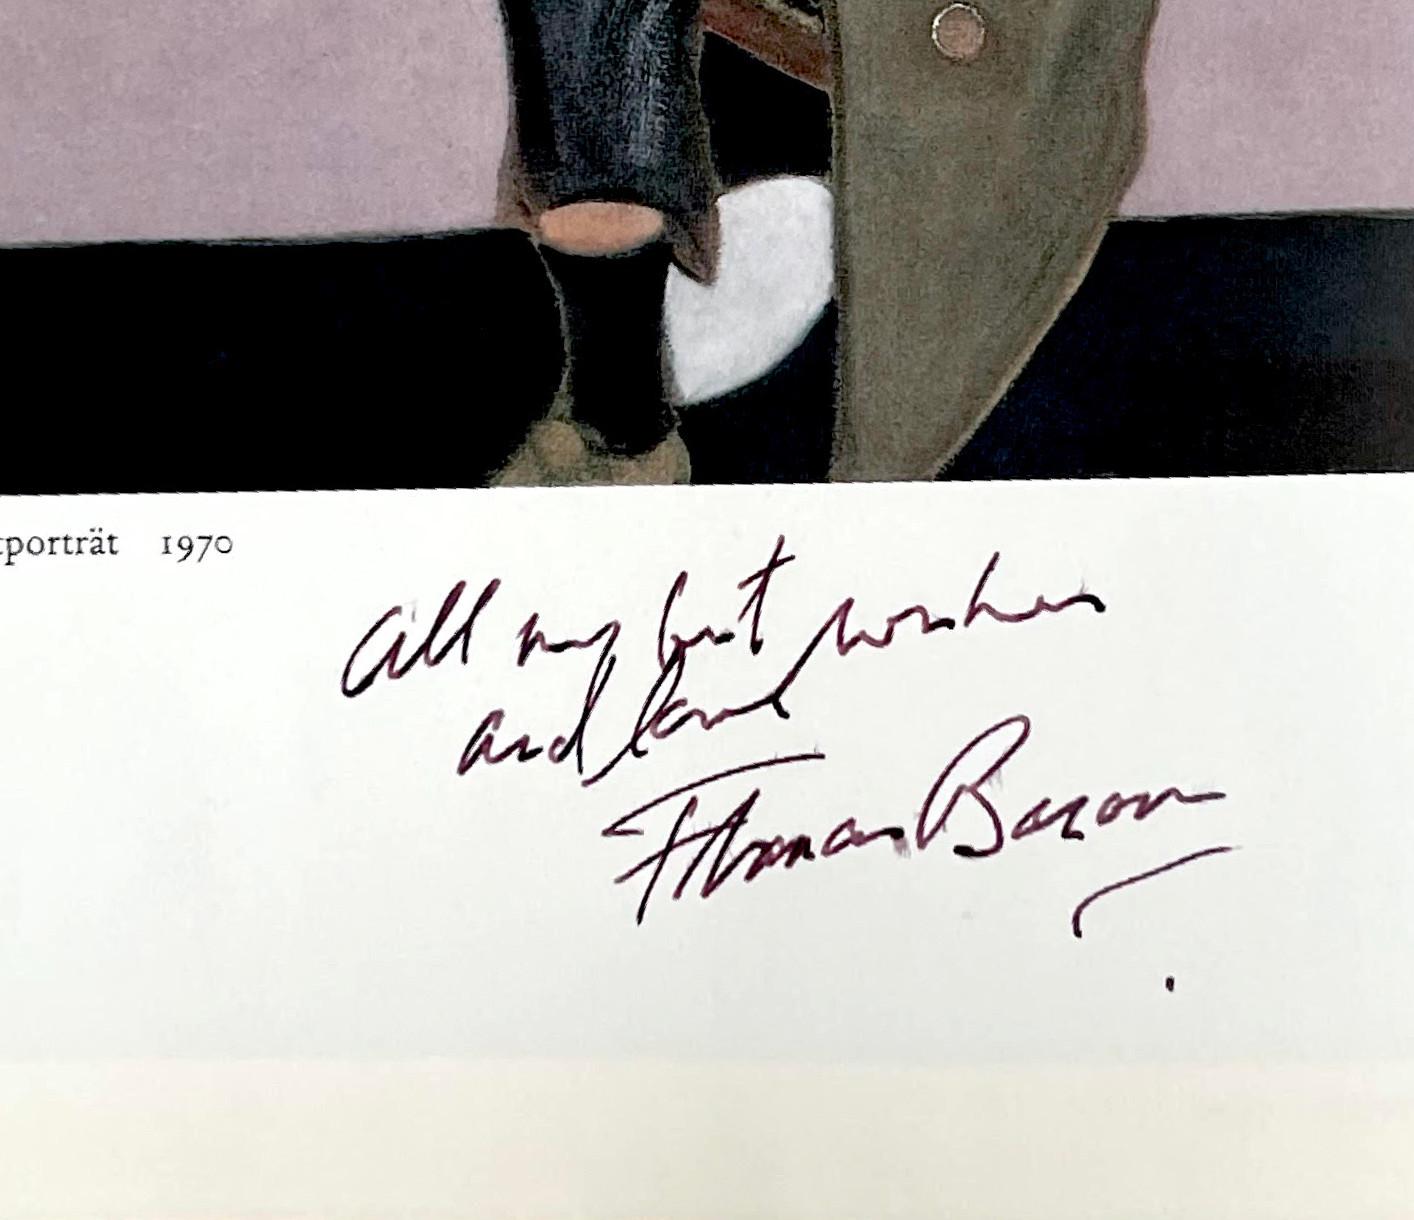 Highly collectible and coveted item:
Francis Bacon von [with] John Russell (Monograph, hand signed and inscribed twice by Francis Bacon), 1972
Hardback monograph with dust jacket (hand signed and inscribed in ink twice)
Hand signed and inscribed by